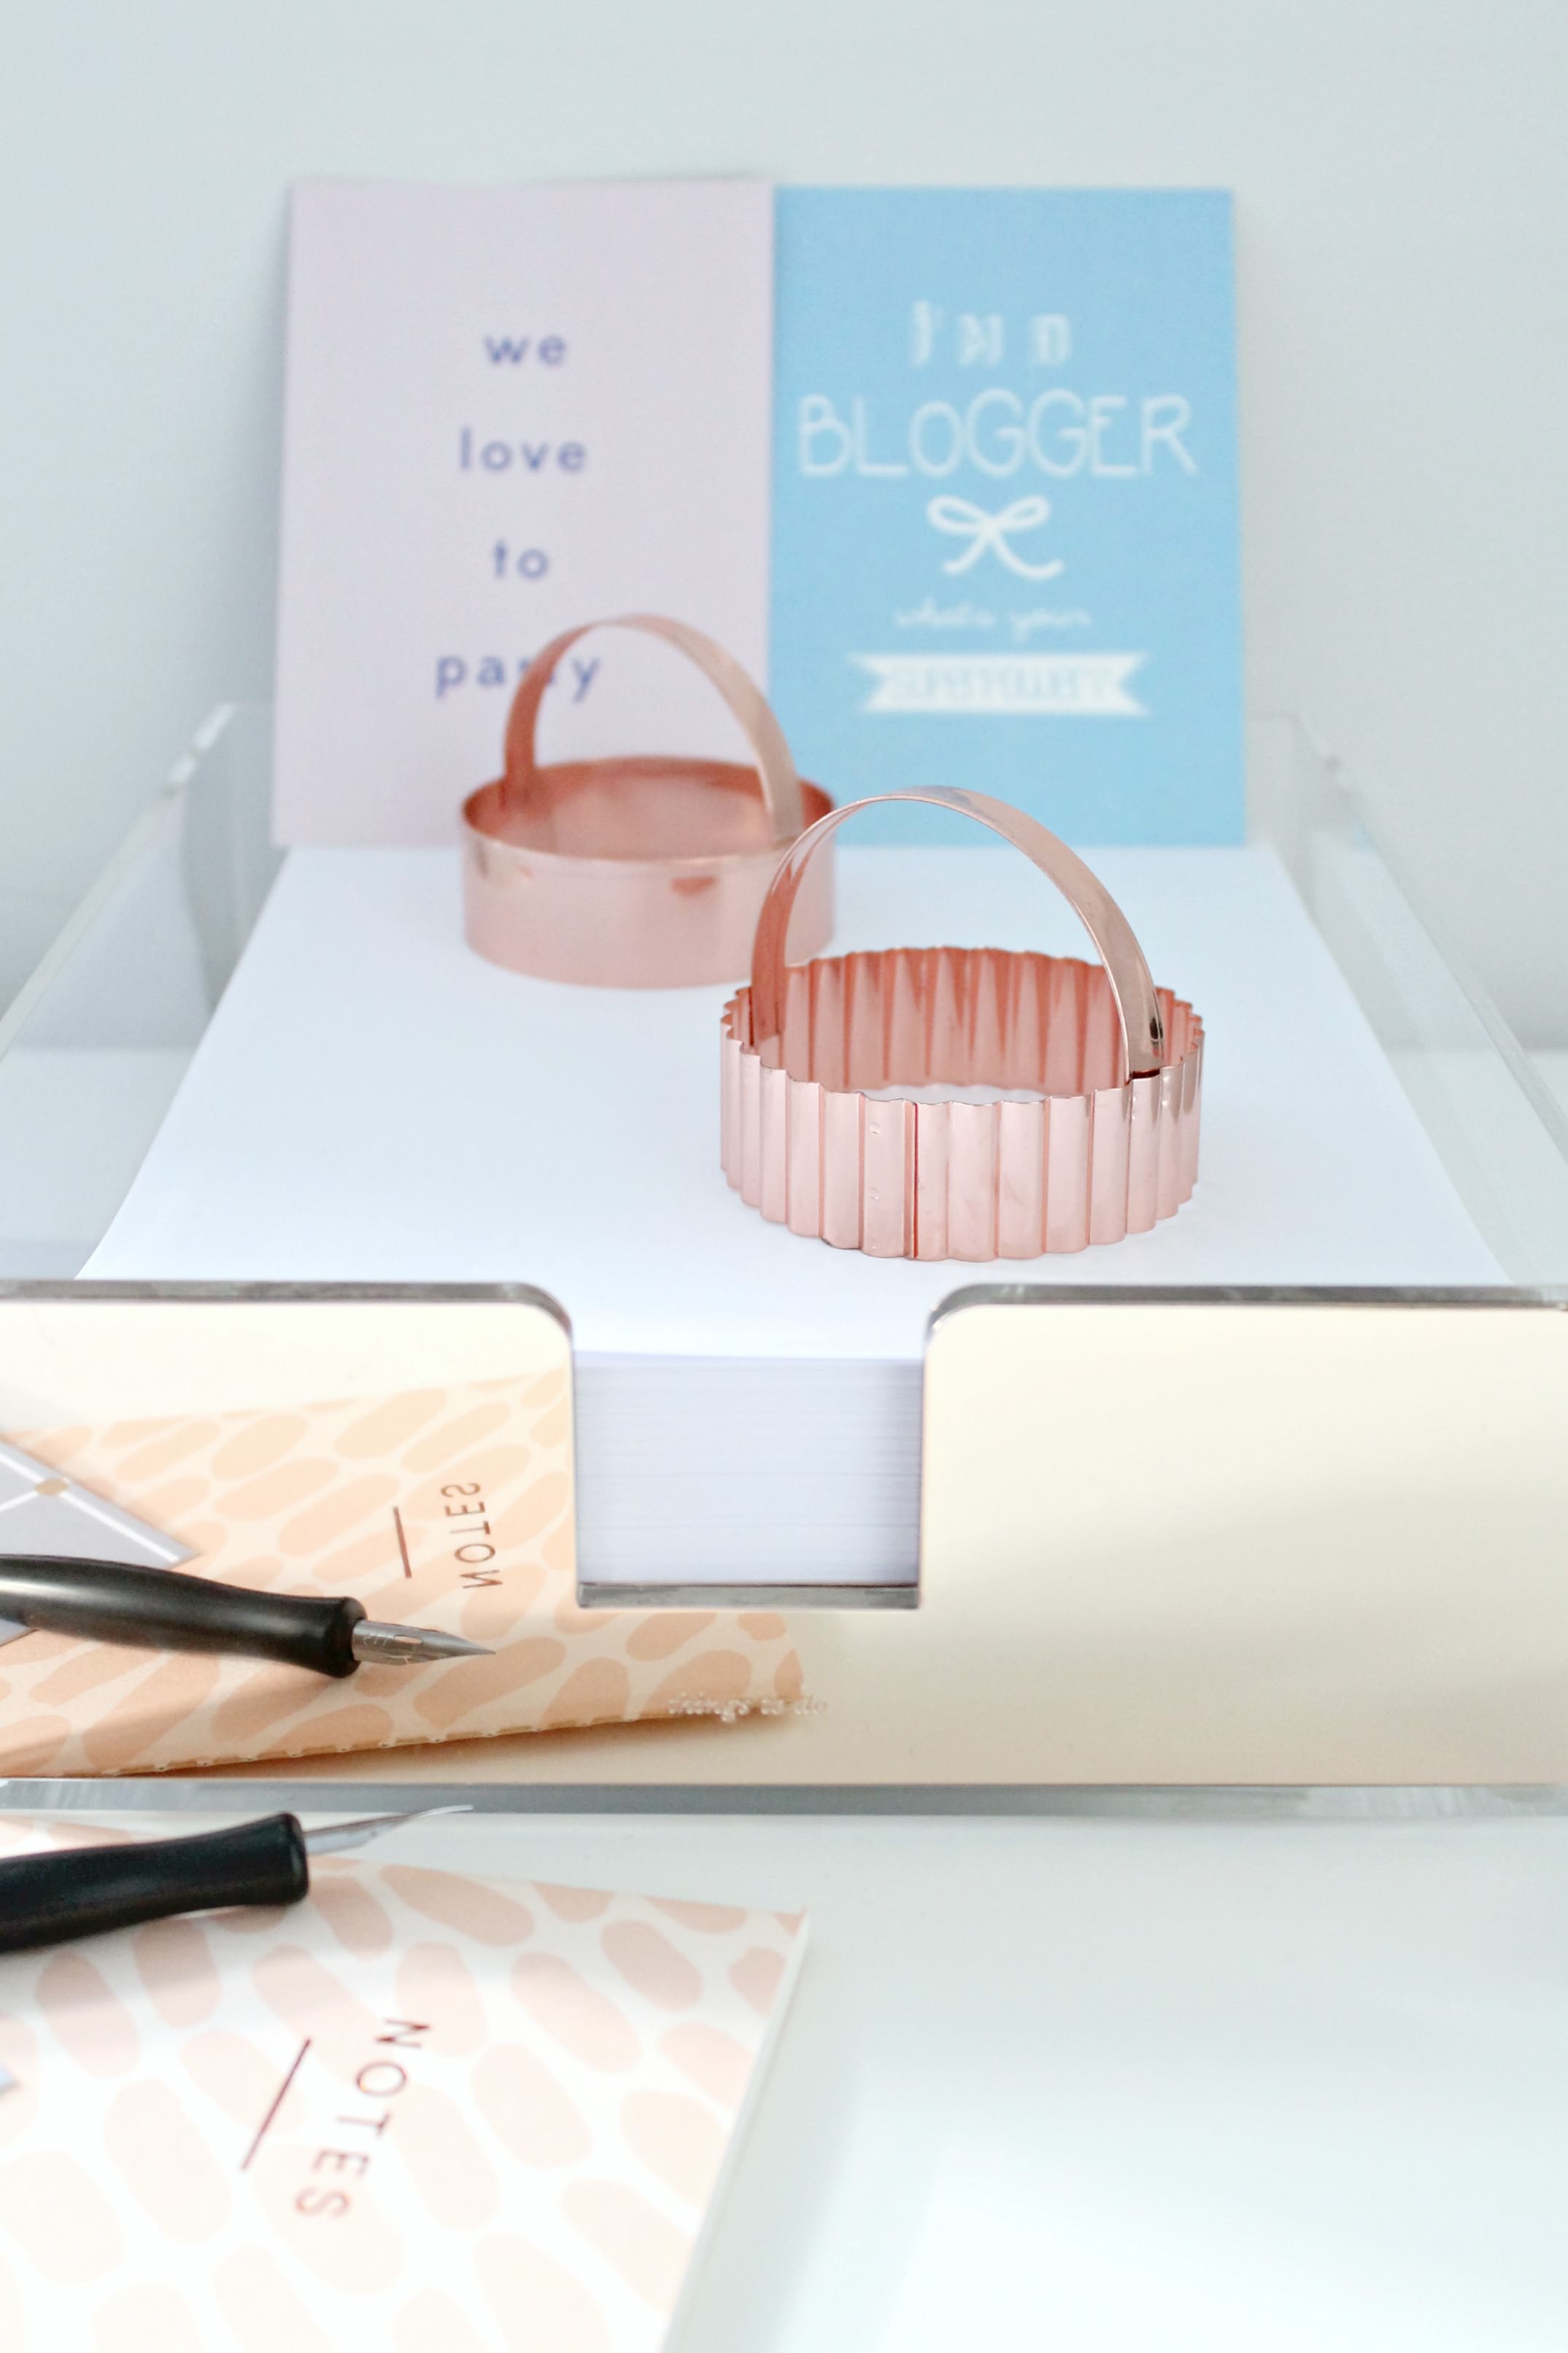 Kate-Spade-paper-tray-photo-and-styling-by-Geraldine-Tan-Little-Big-Bell